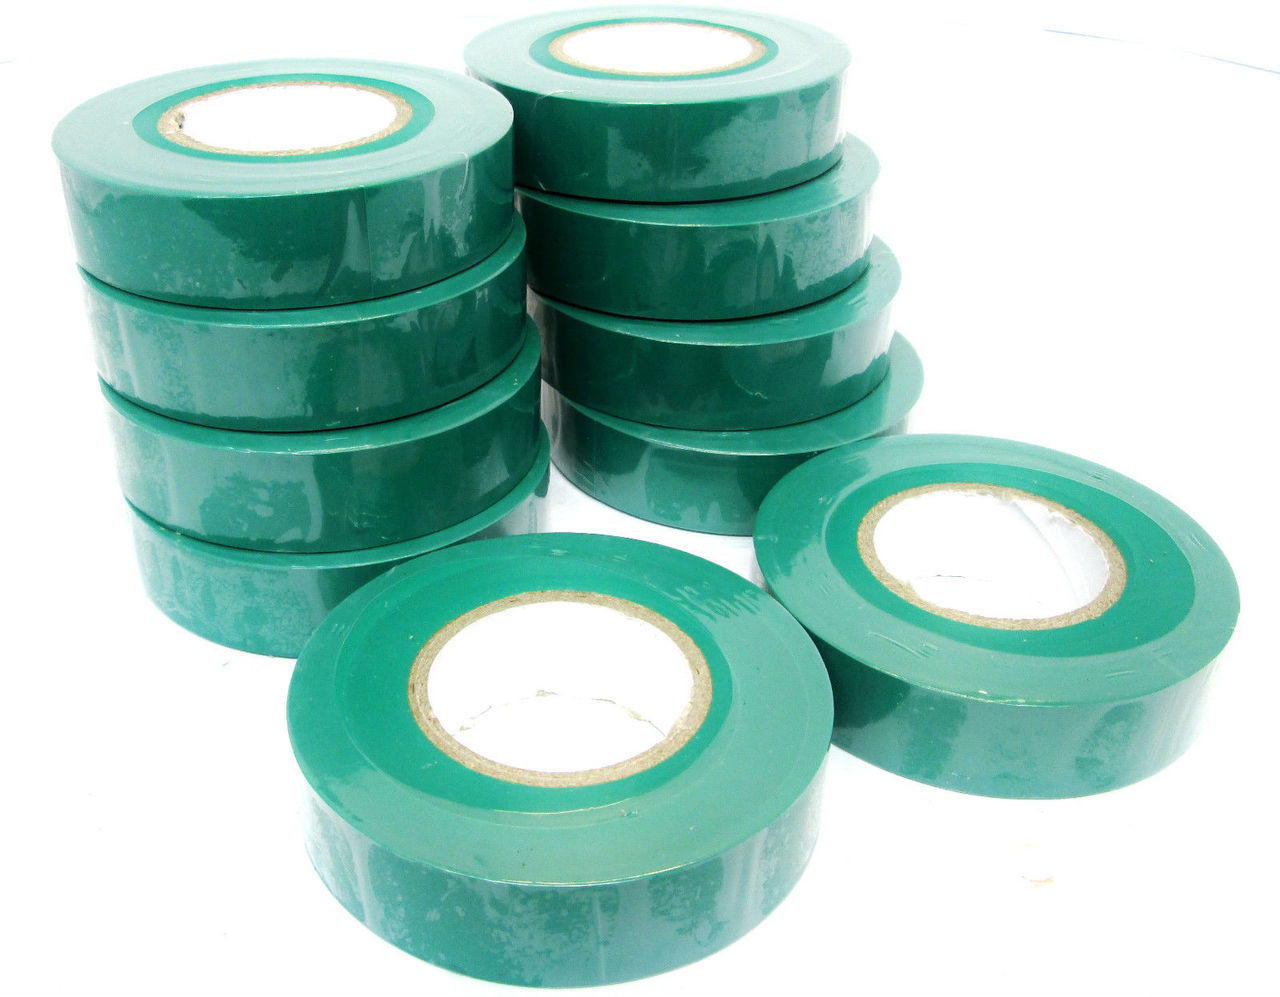 Green Insulating / Insulation / Electrical Tape 19mm x 20m of 10 AD003 G